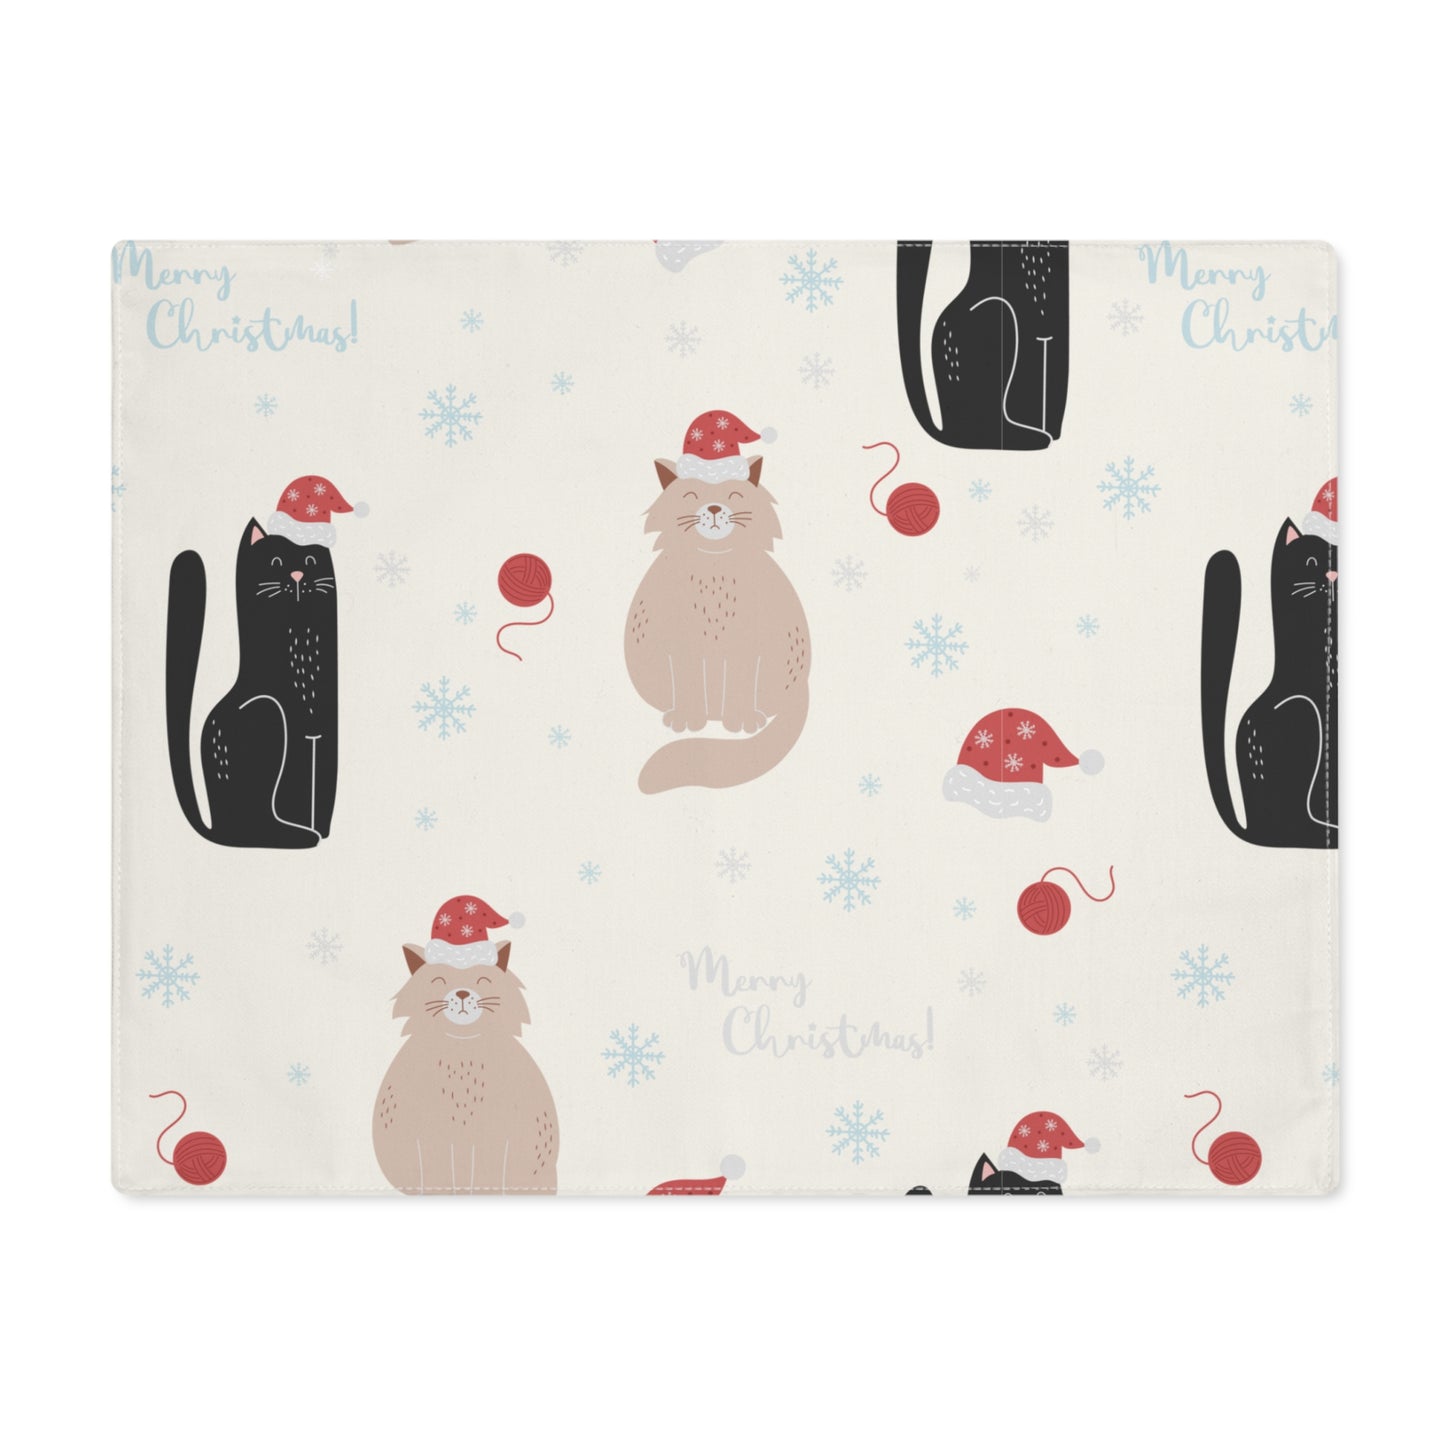 Black and Tan Cat Christmas Placemat, 1pc